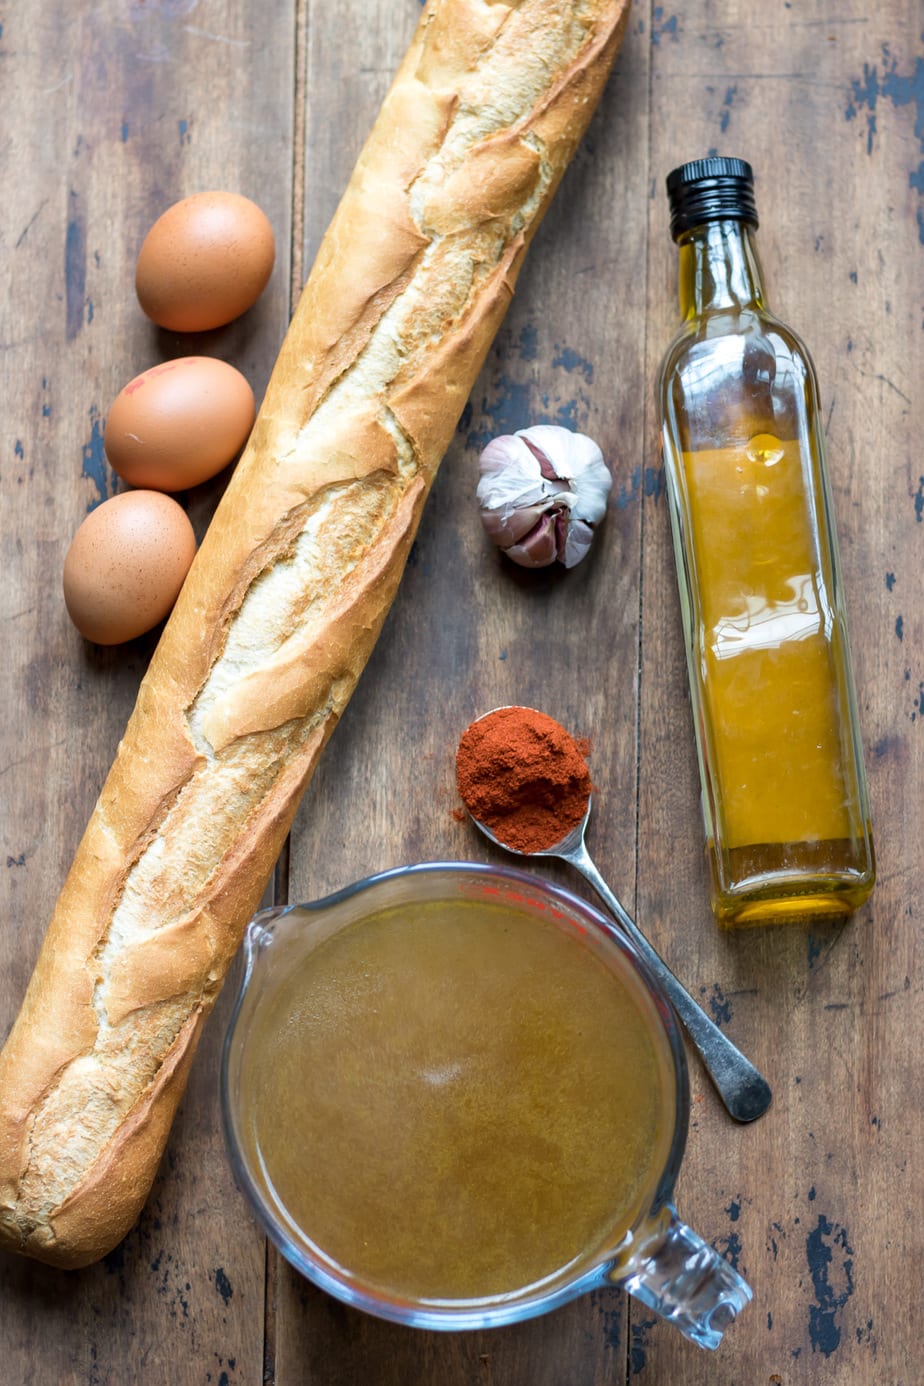 Ingredients on a table: bread, eggs, stock, paprika, garlic and oil.